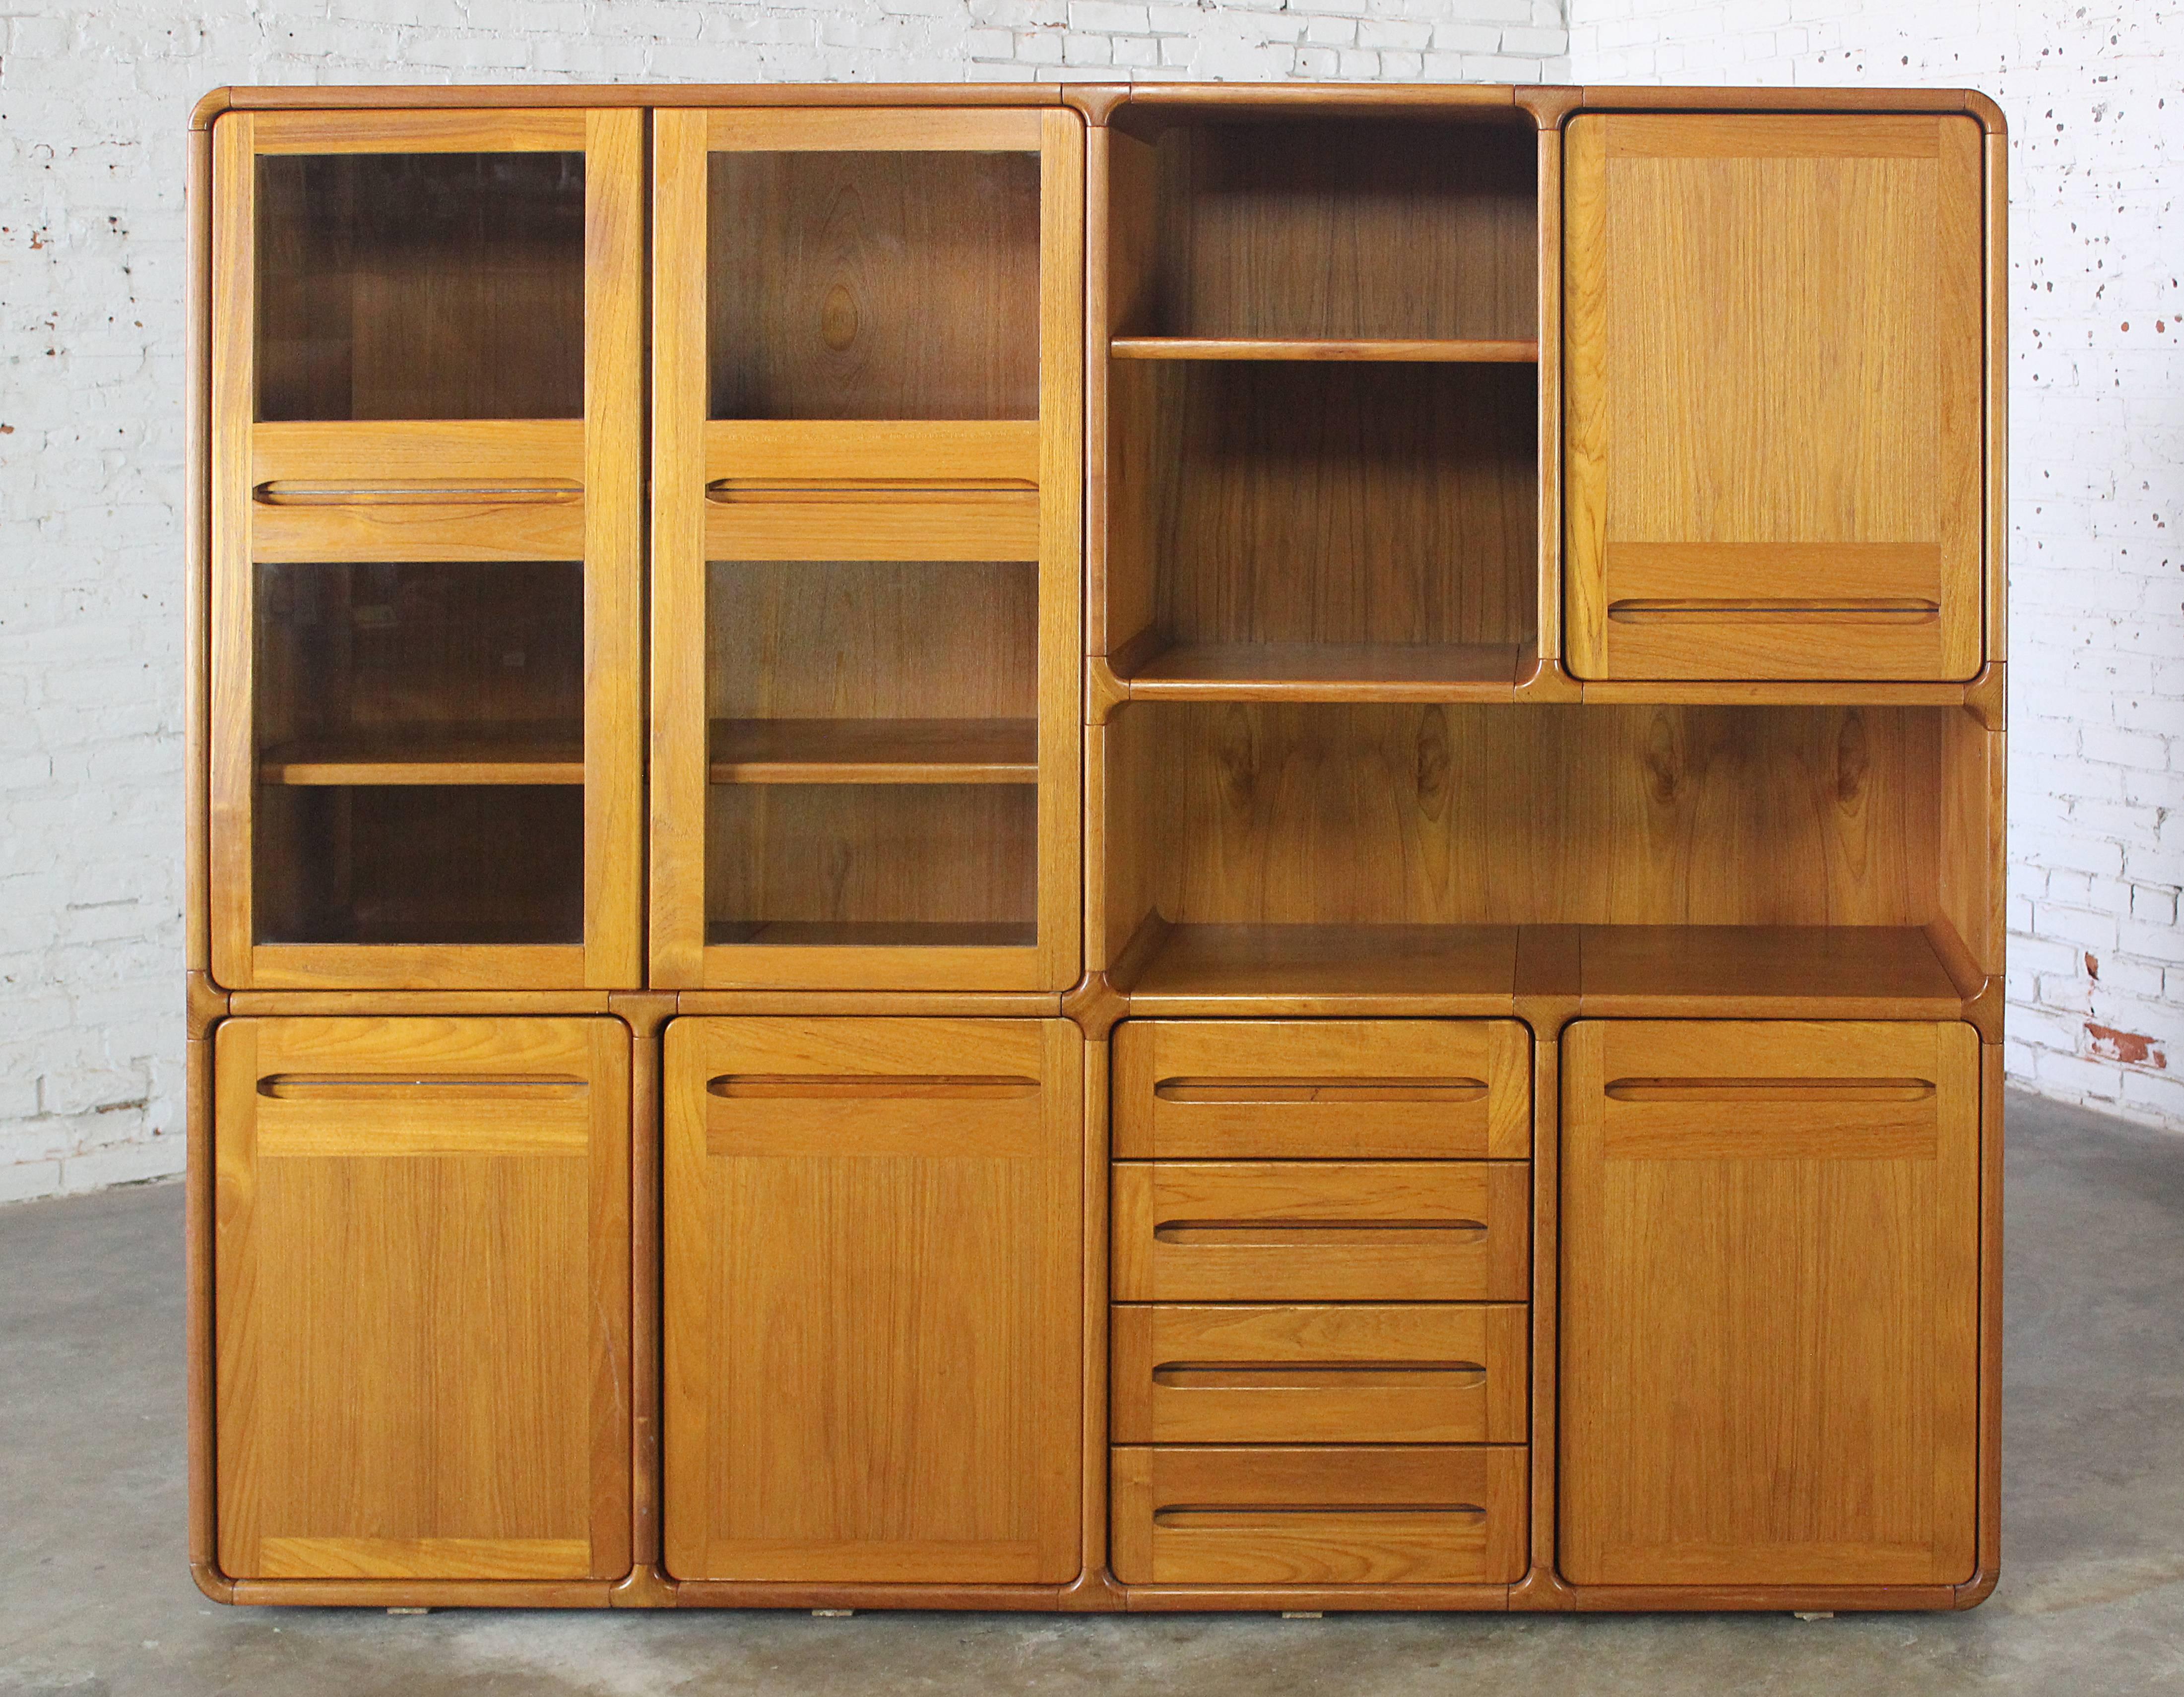 Very nice teak wall unit bookcase, display, and storage cabinet in the Dyrlund Scandinavian Modern style of the 1970s. It is in great vintage condition.

This is an awesome vintage Scandinavian Modern wall unit with both open and closed display